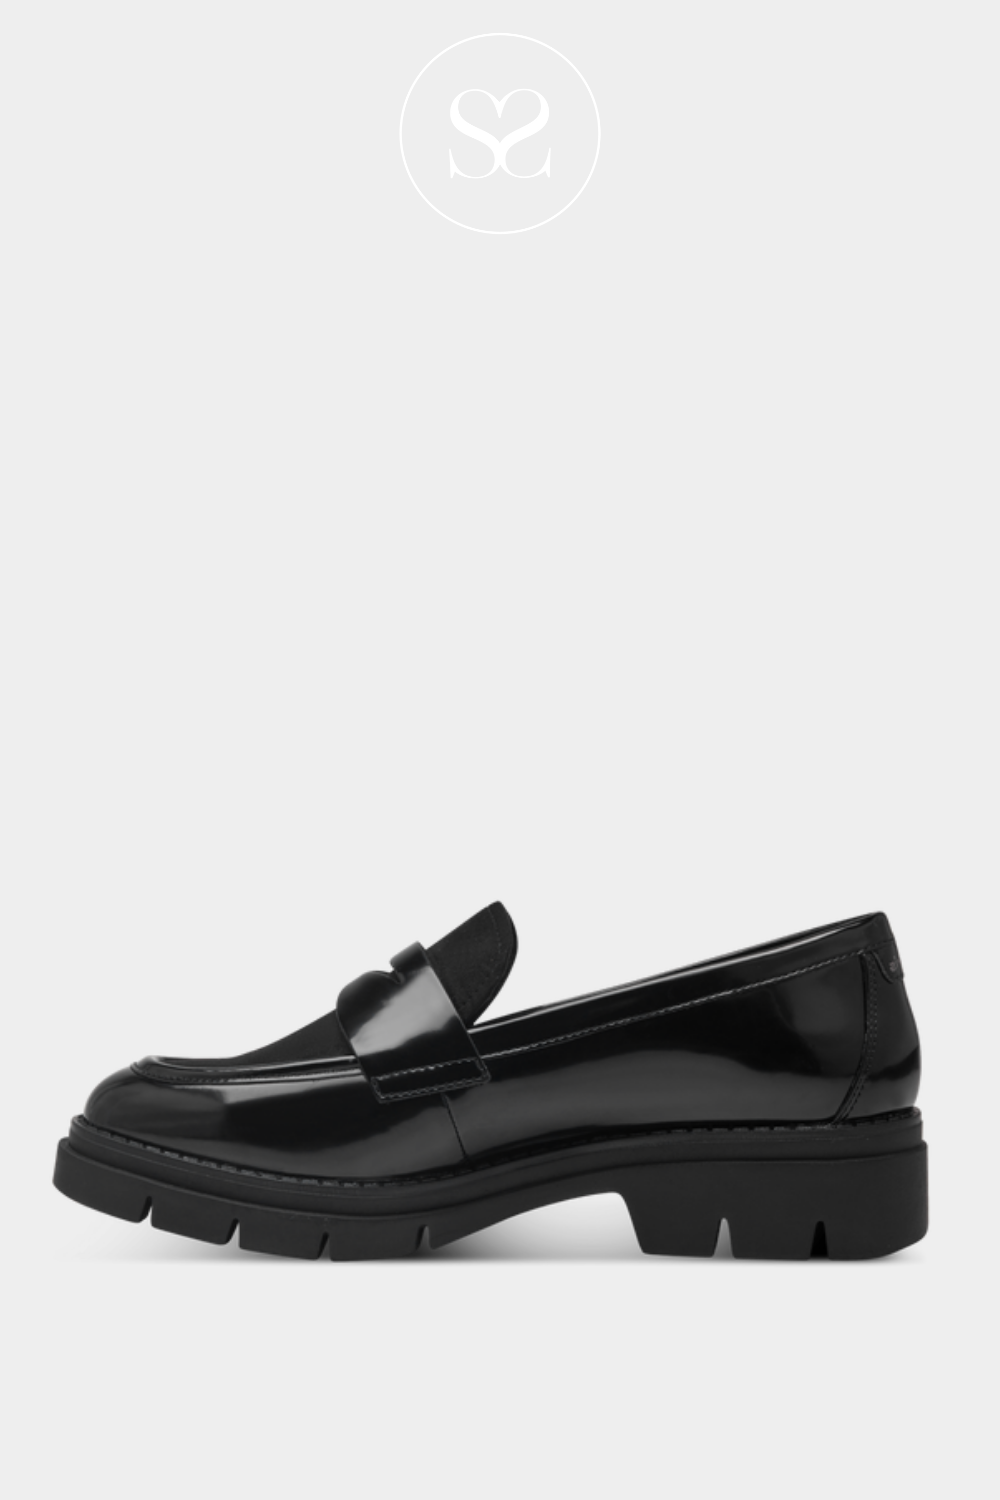 TAMARIS 124313 BLACK LEATHER CHUNKY LOAFER . TAMARIS FOR SALE PURCHASE TO BUY IRELAND.